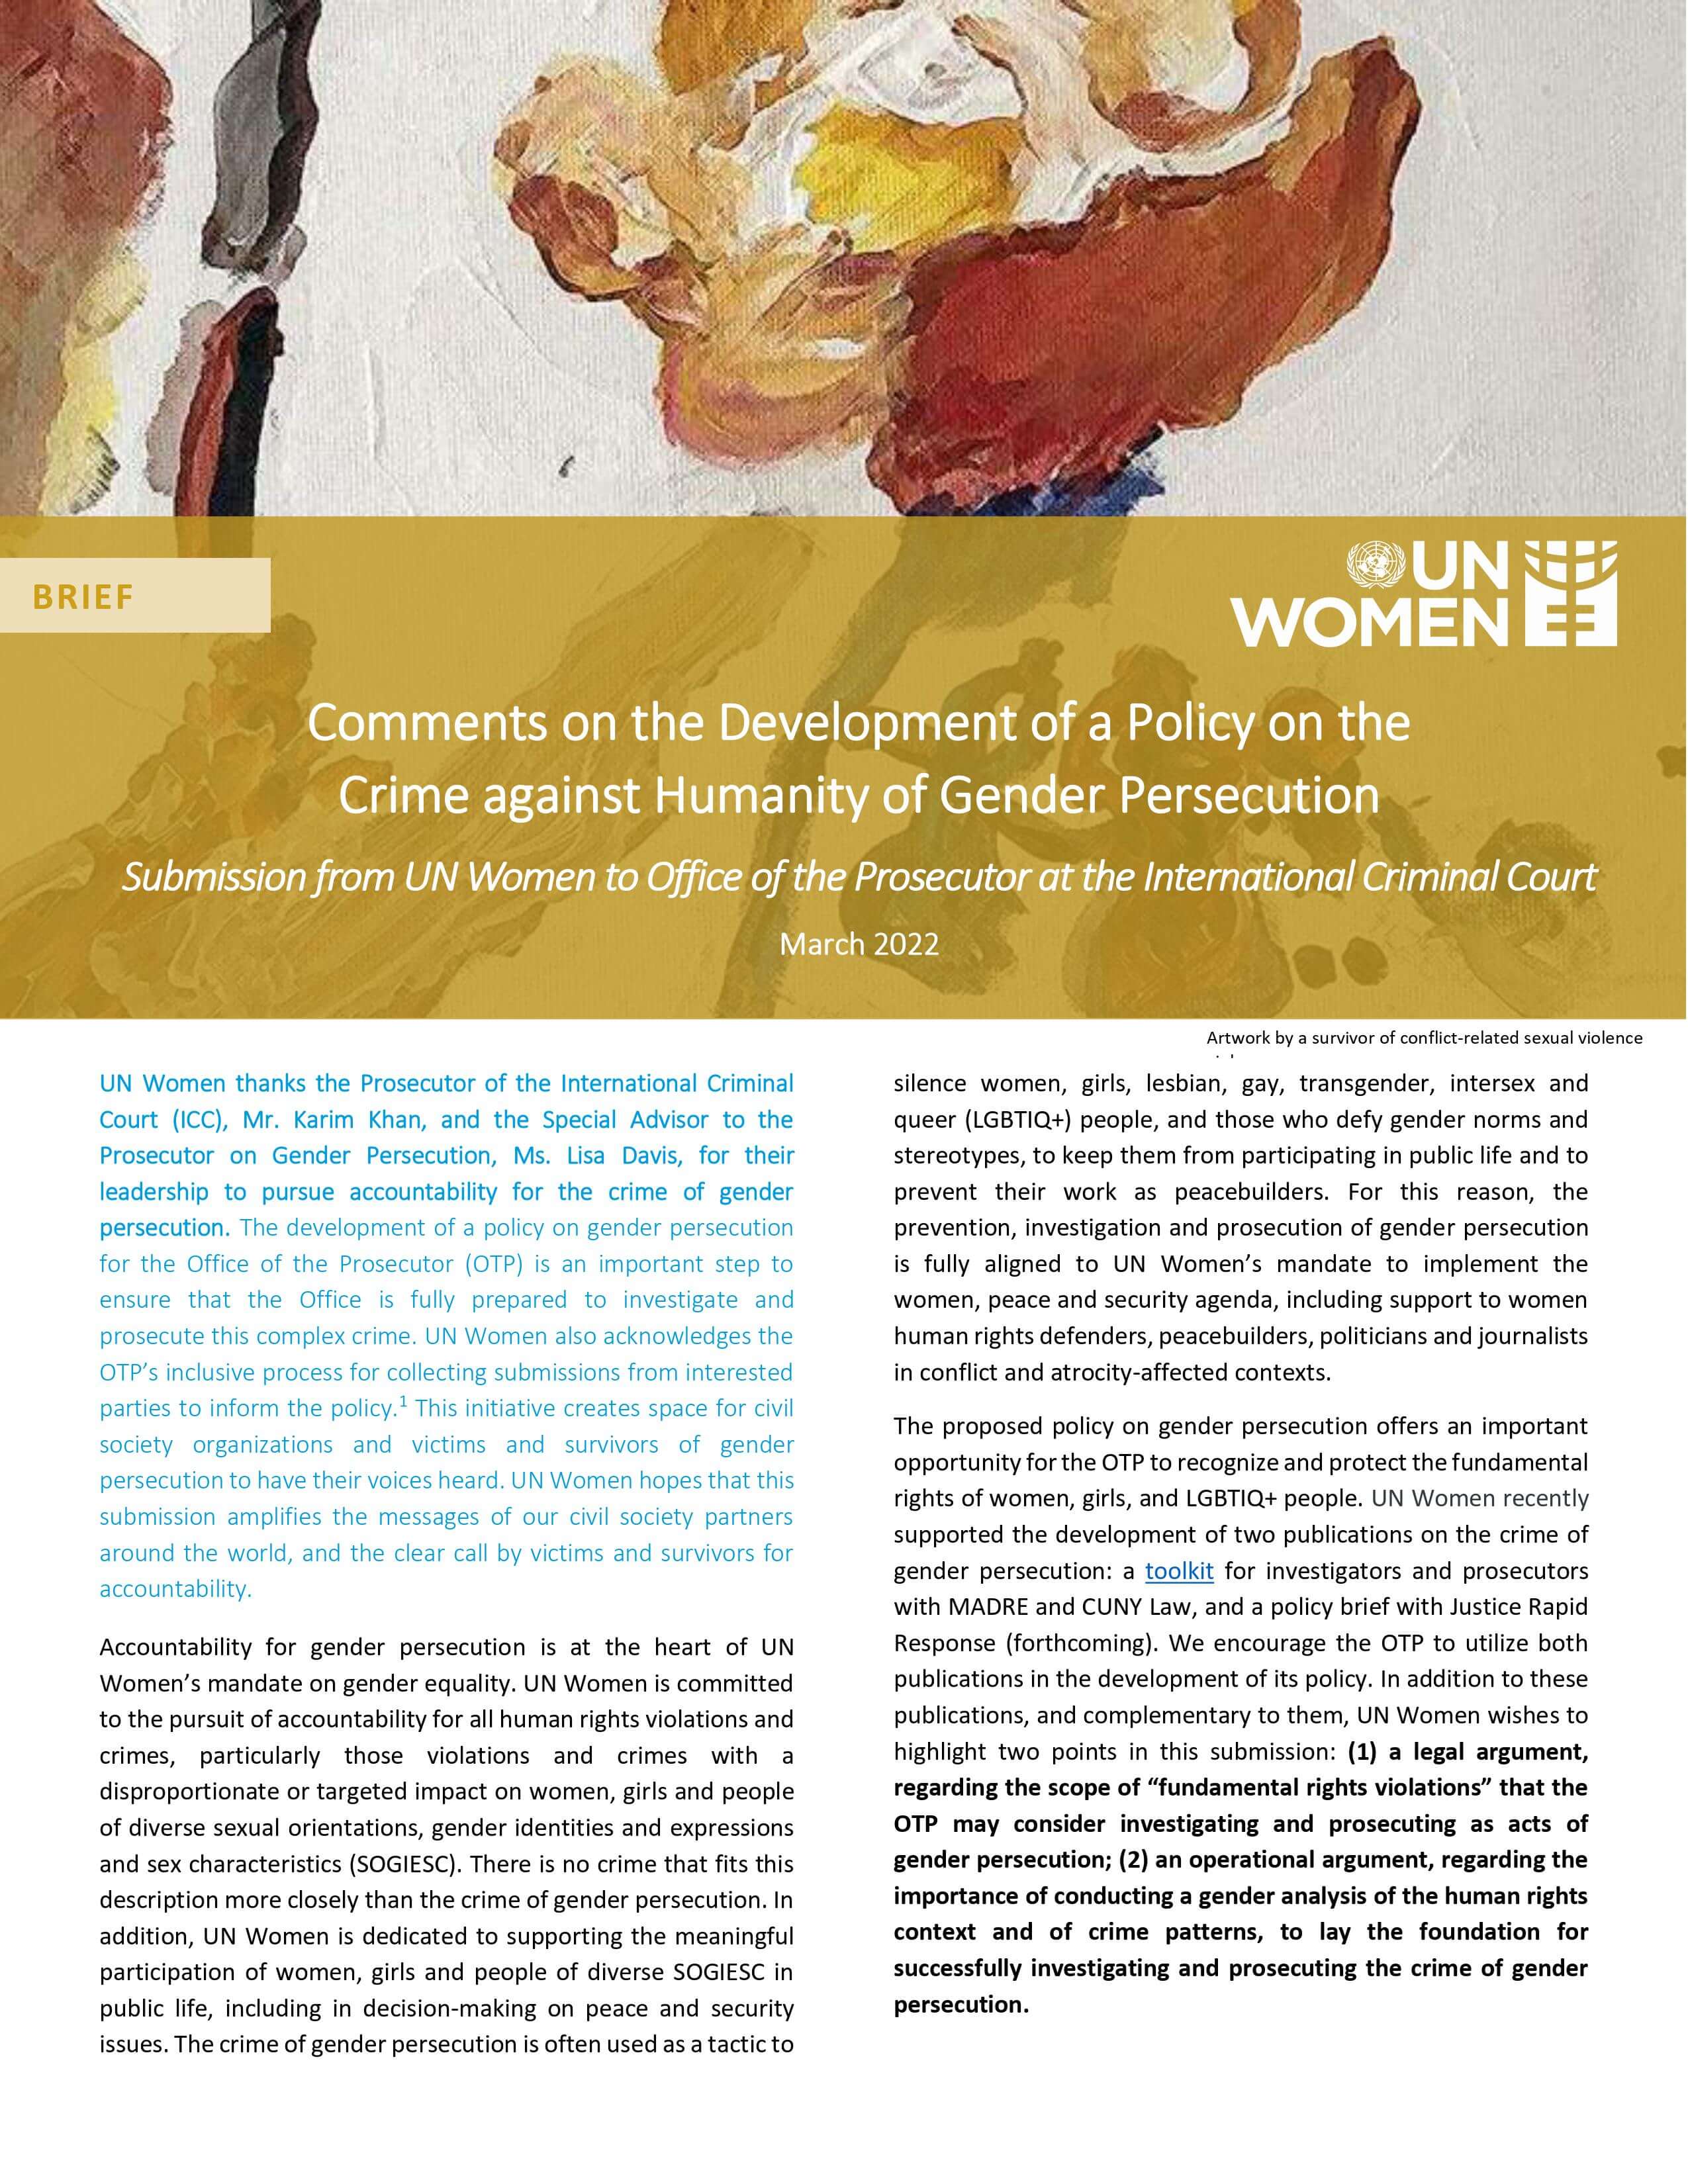 Comments on the development of a policy on the crime of gender persecution: Submission from UN Women to the Office of the Prosecutor at the International Criminal Court